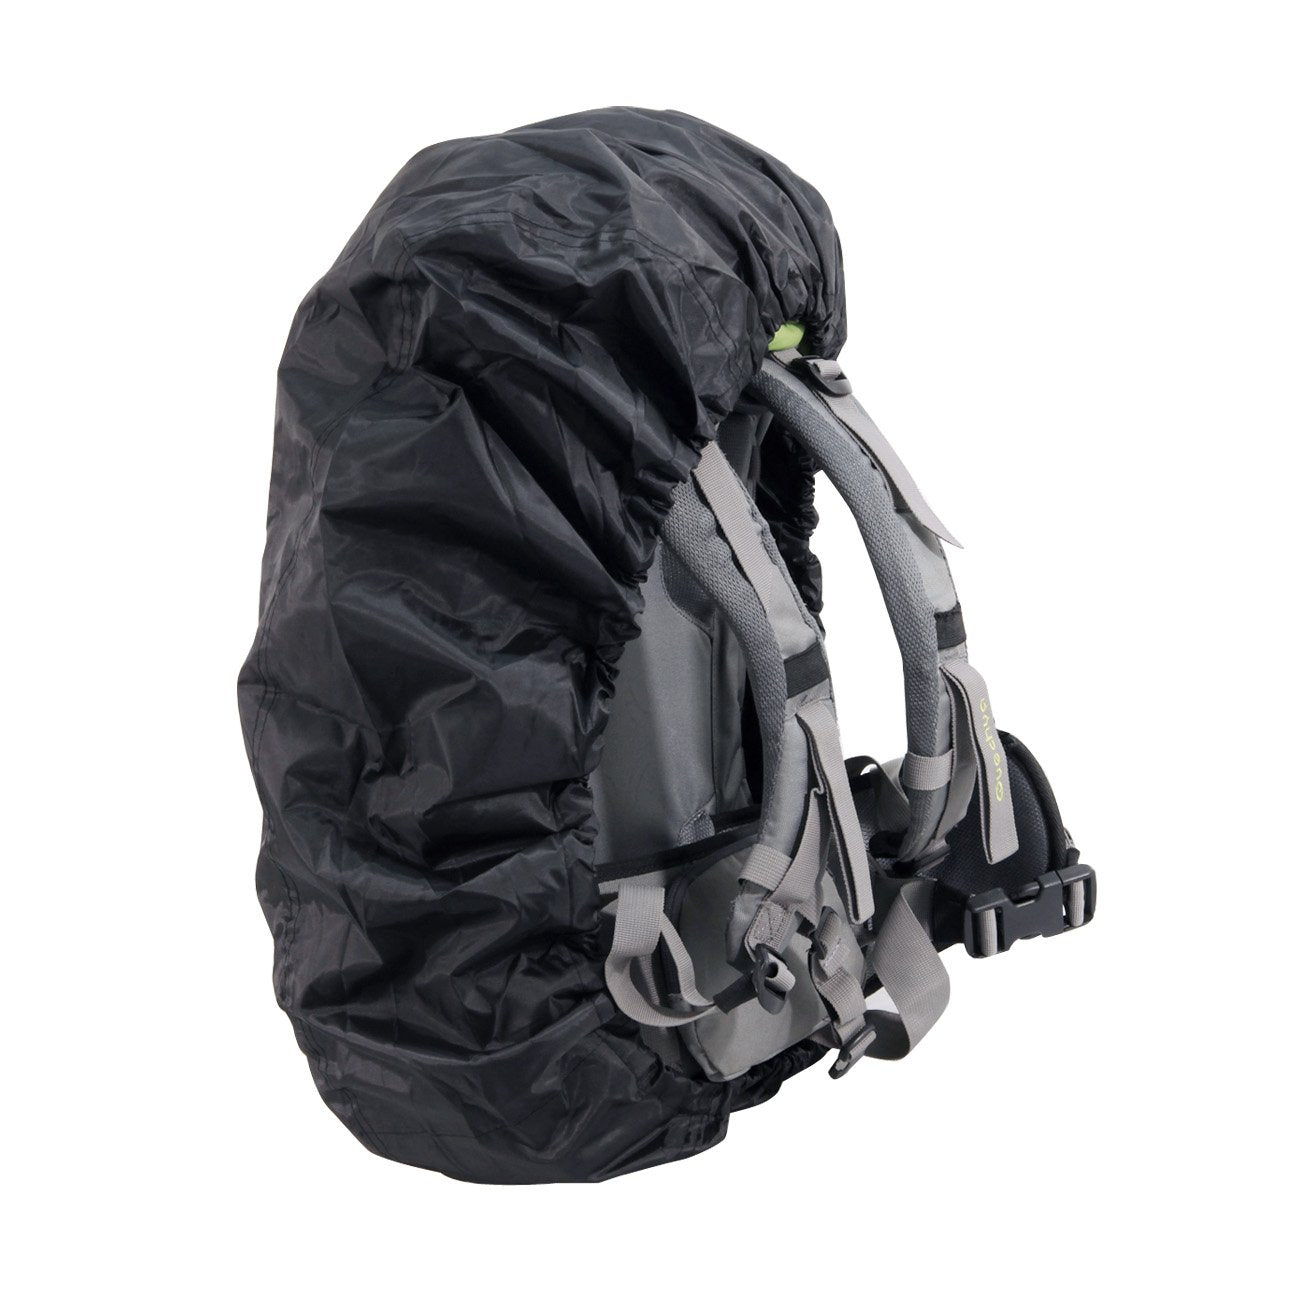 BLUE FIELD Rain cover backpack cover sack cover L size 55 ~ 80L Black - ebowsos